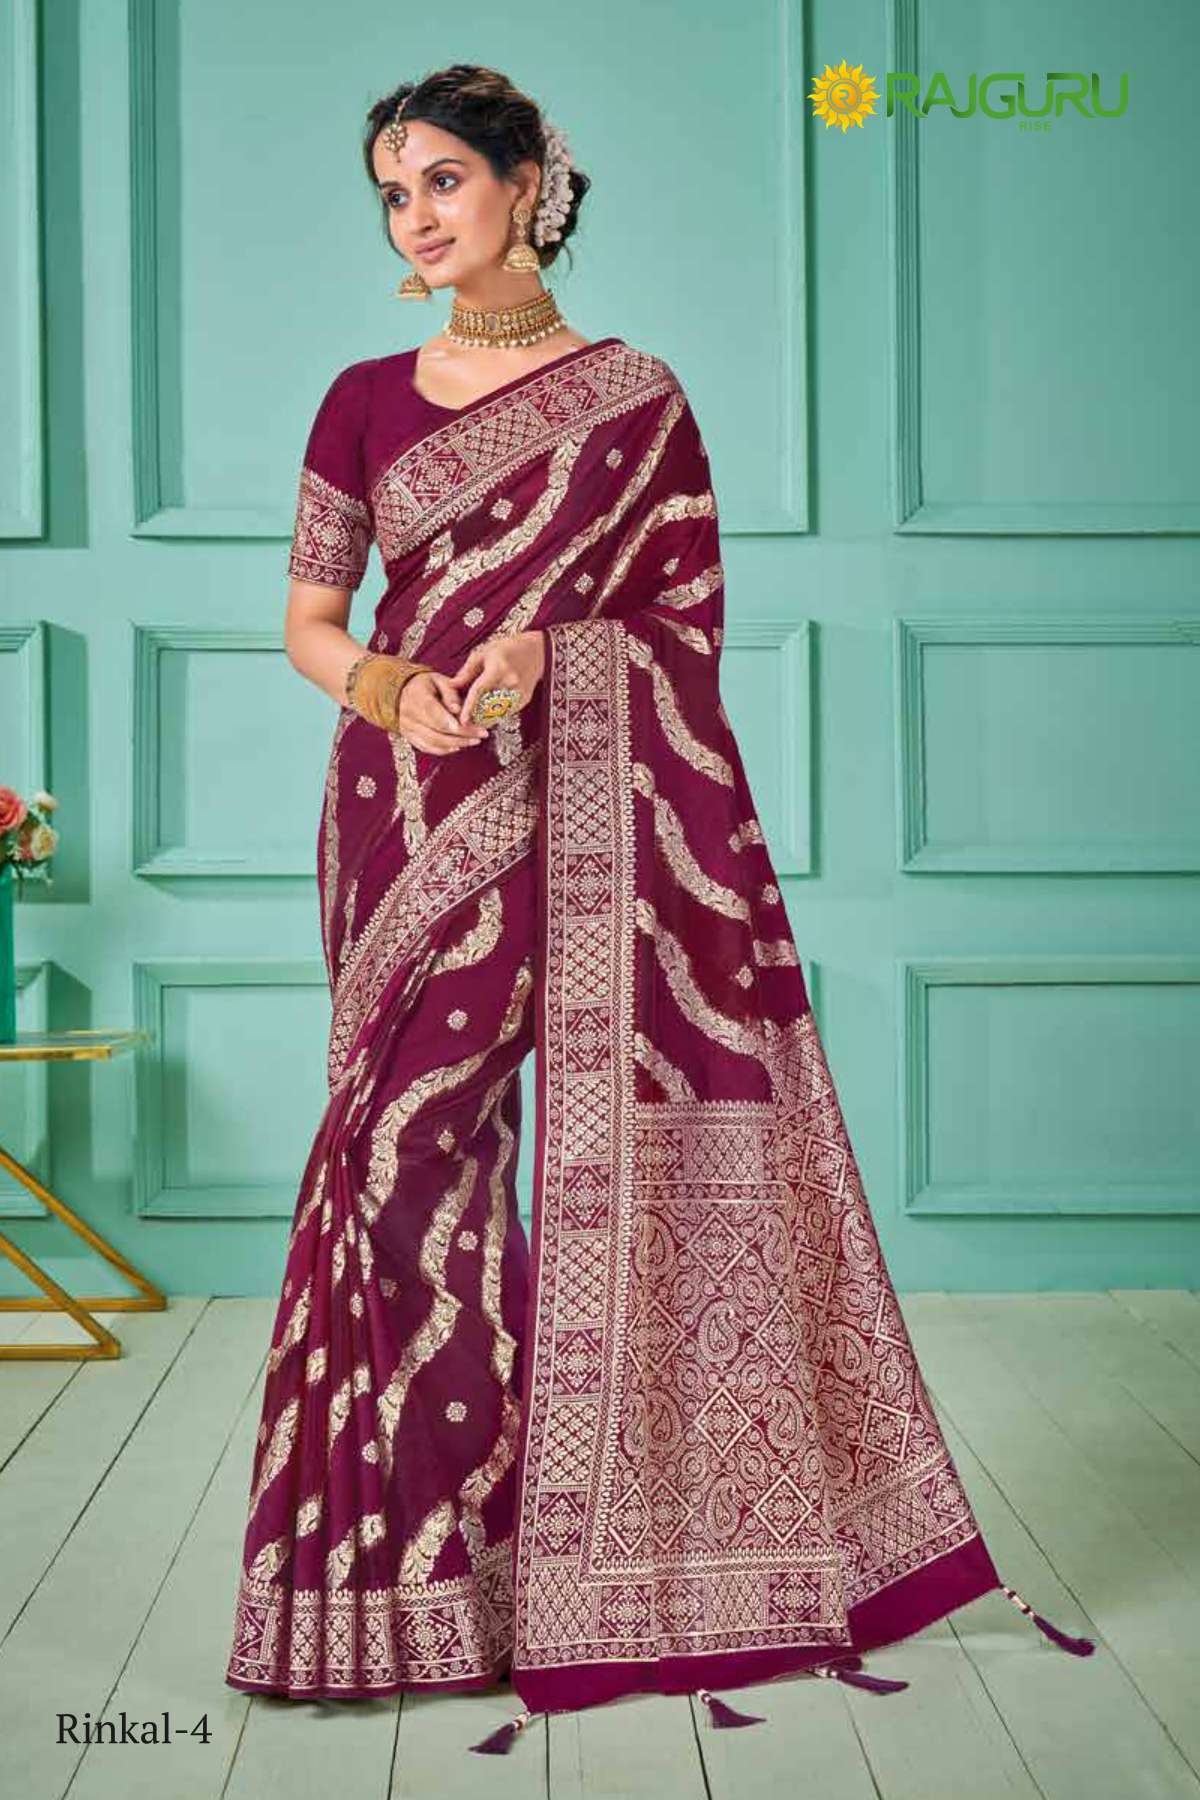 RAJGURU PRESENTS RINKAL DESIGNER PARTY WEAR FANCY FABRIC WITH DOUBLE BLOUSE SAREES CATALOG WHOLESALER AND EXPORTER IN SURAT